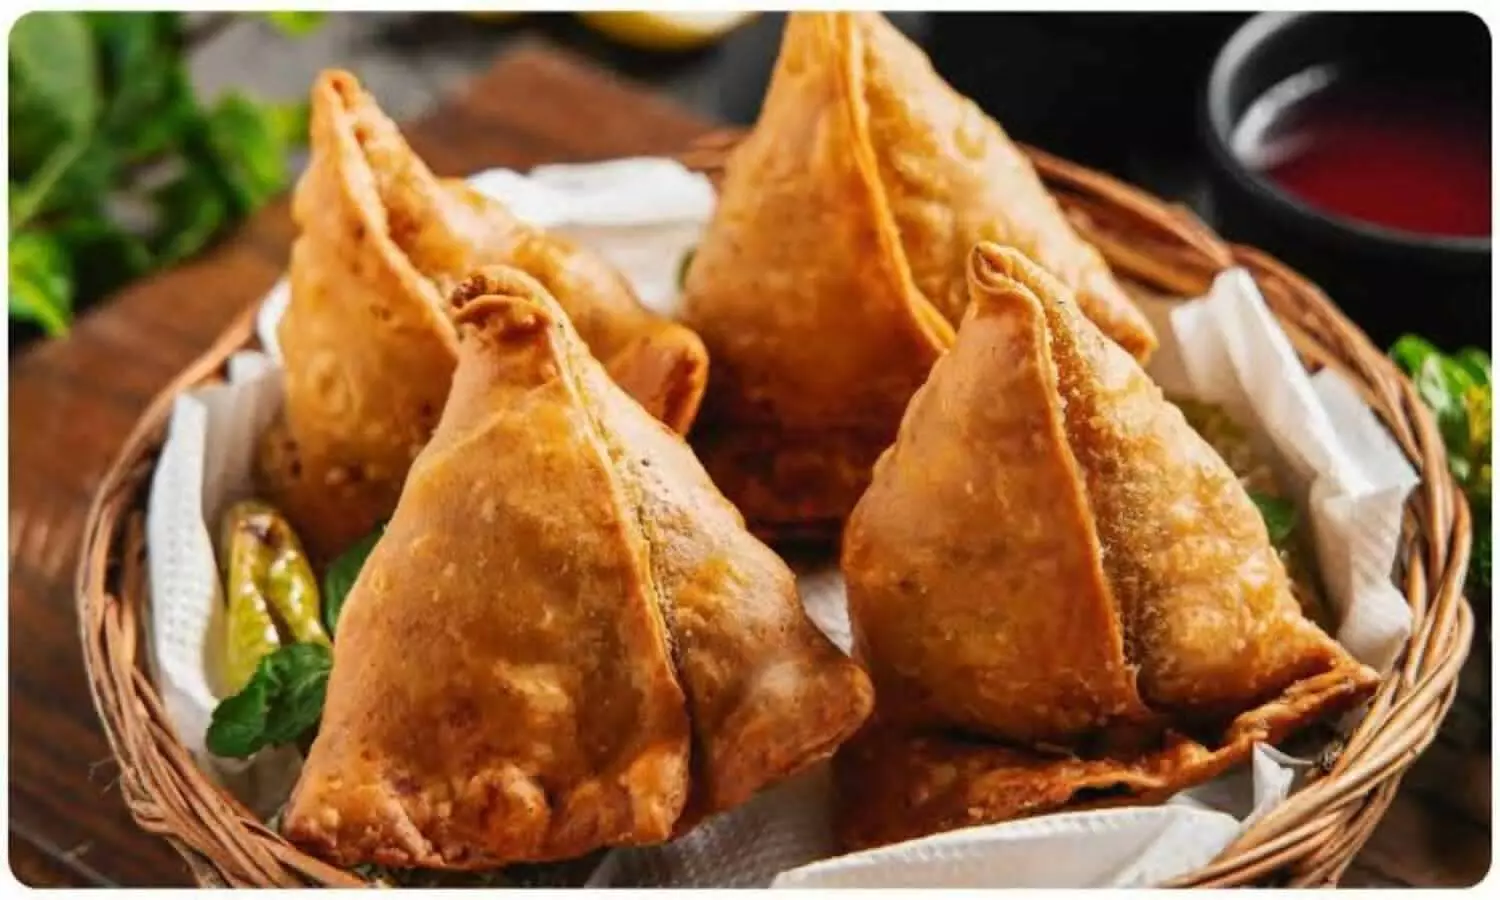 How to make bazaar style samosa at home